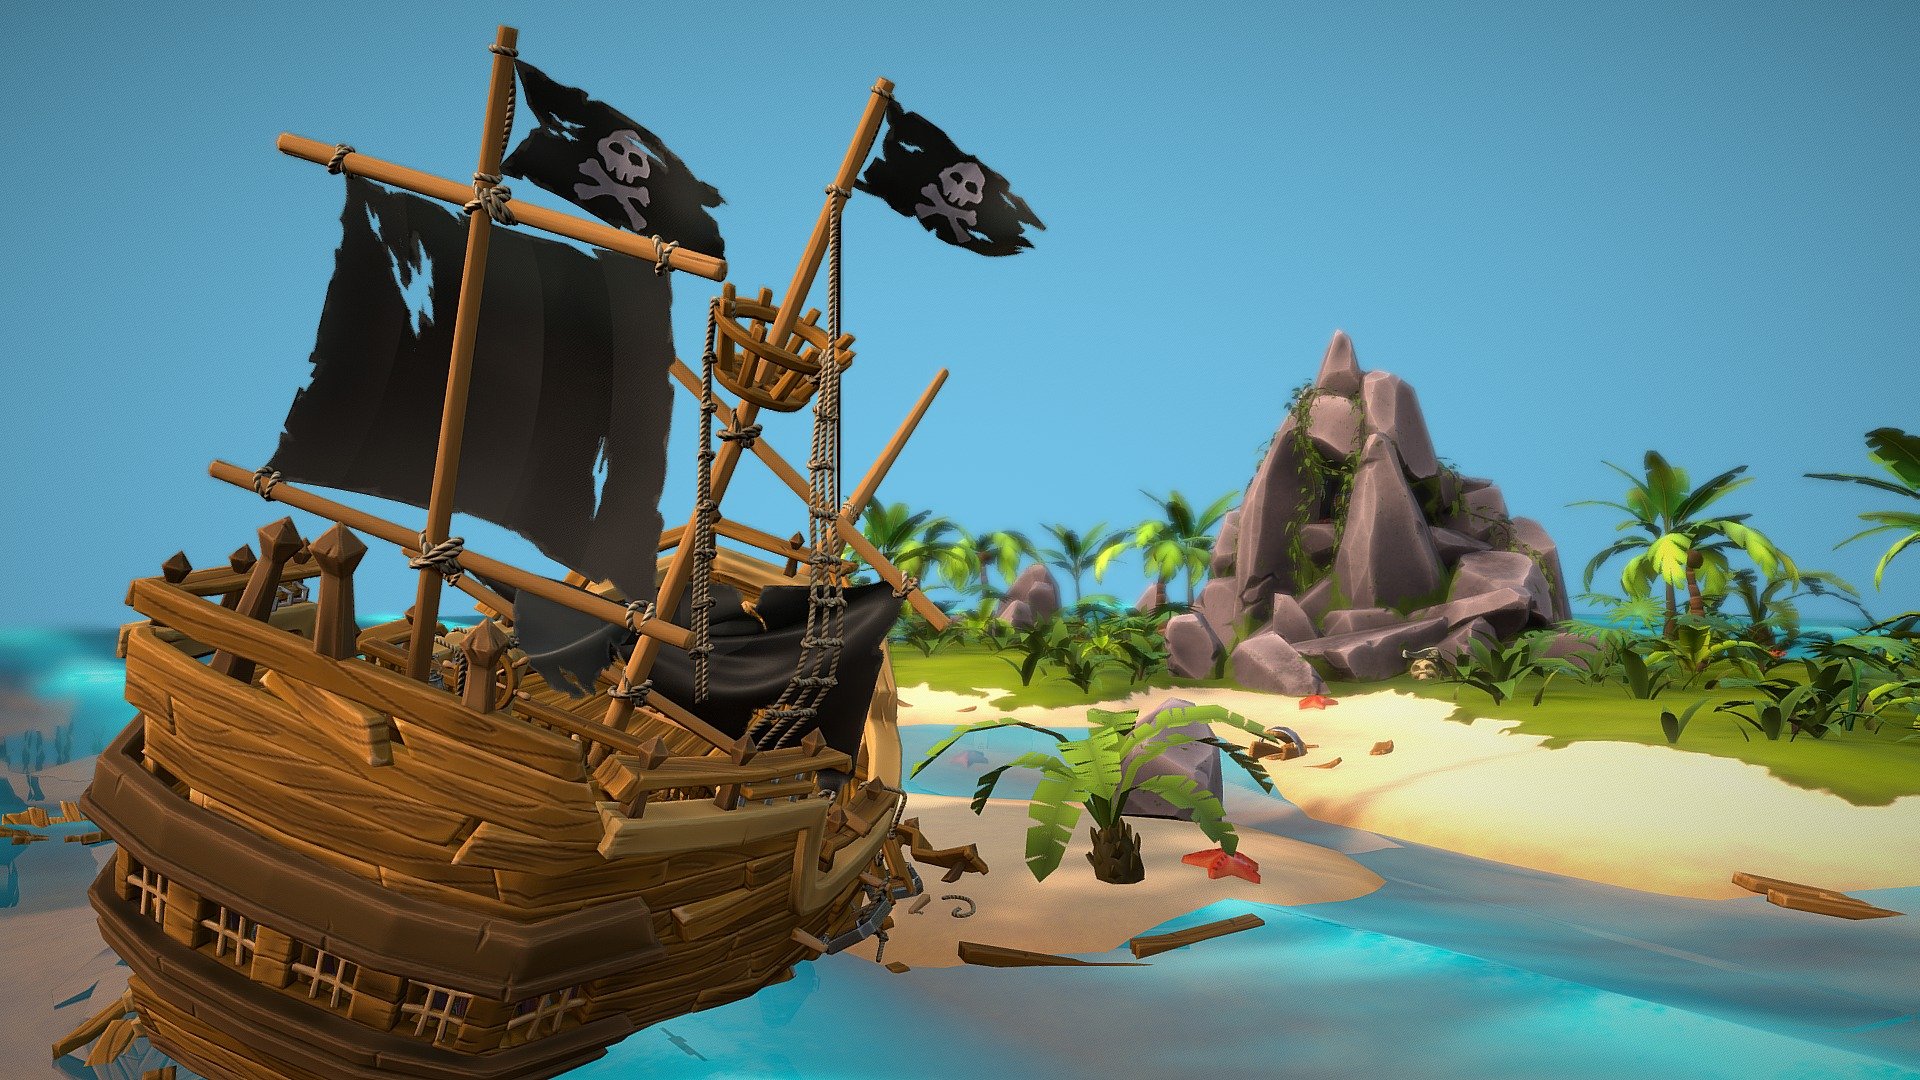 The story of treasure island and the sad fate of pirates.
Made in 3DMax, Marmoset, Substance Painter, ZBrush 3d model